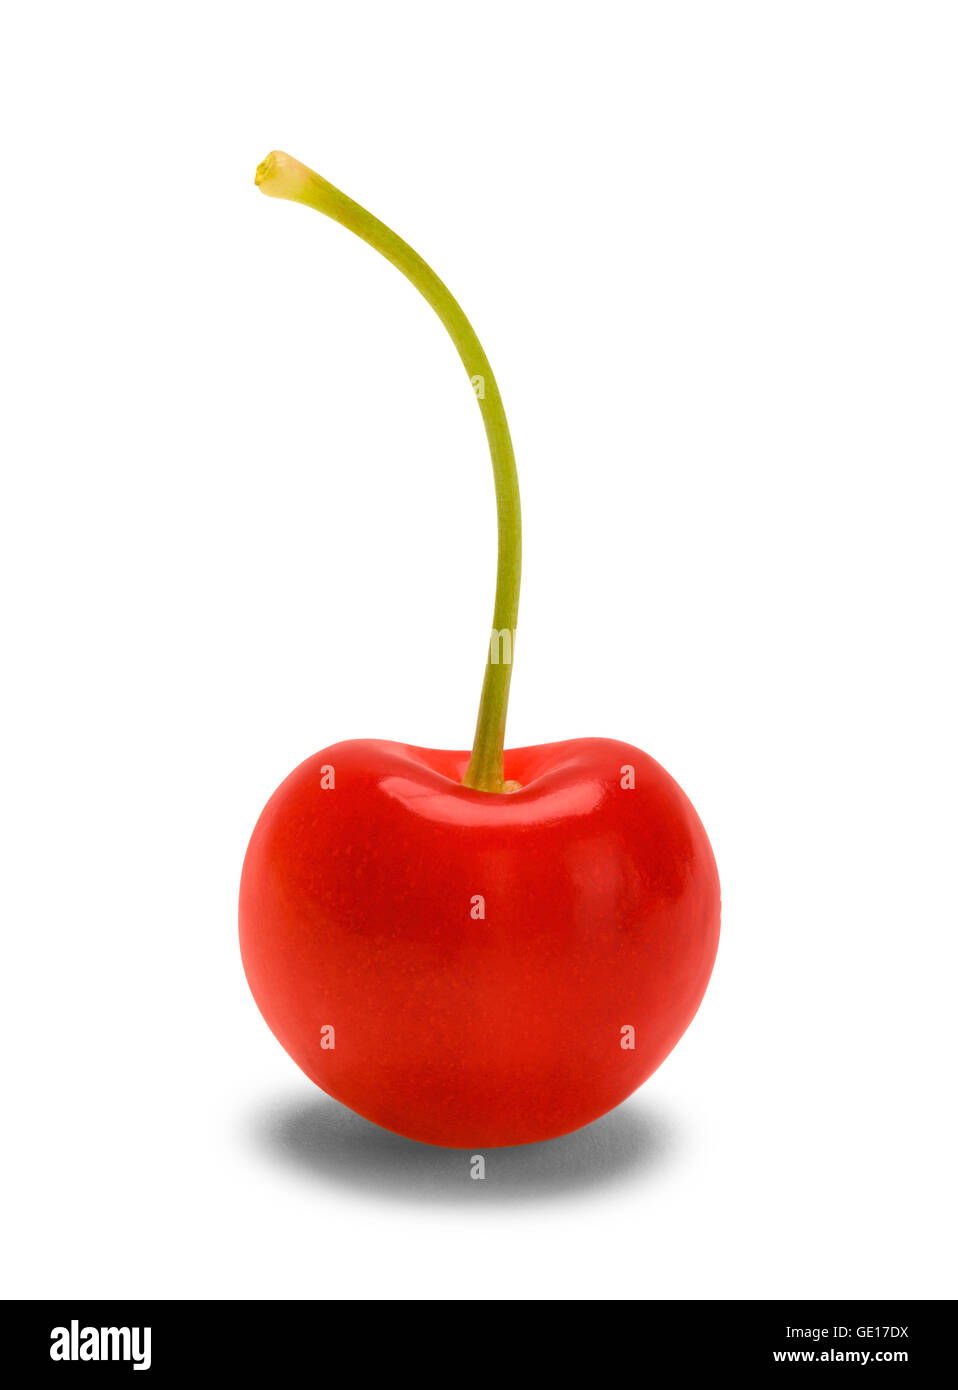 One Red Cherry Isolated on White Background. Stock Photo